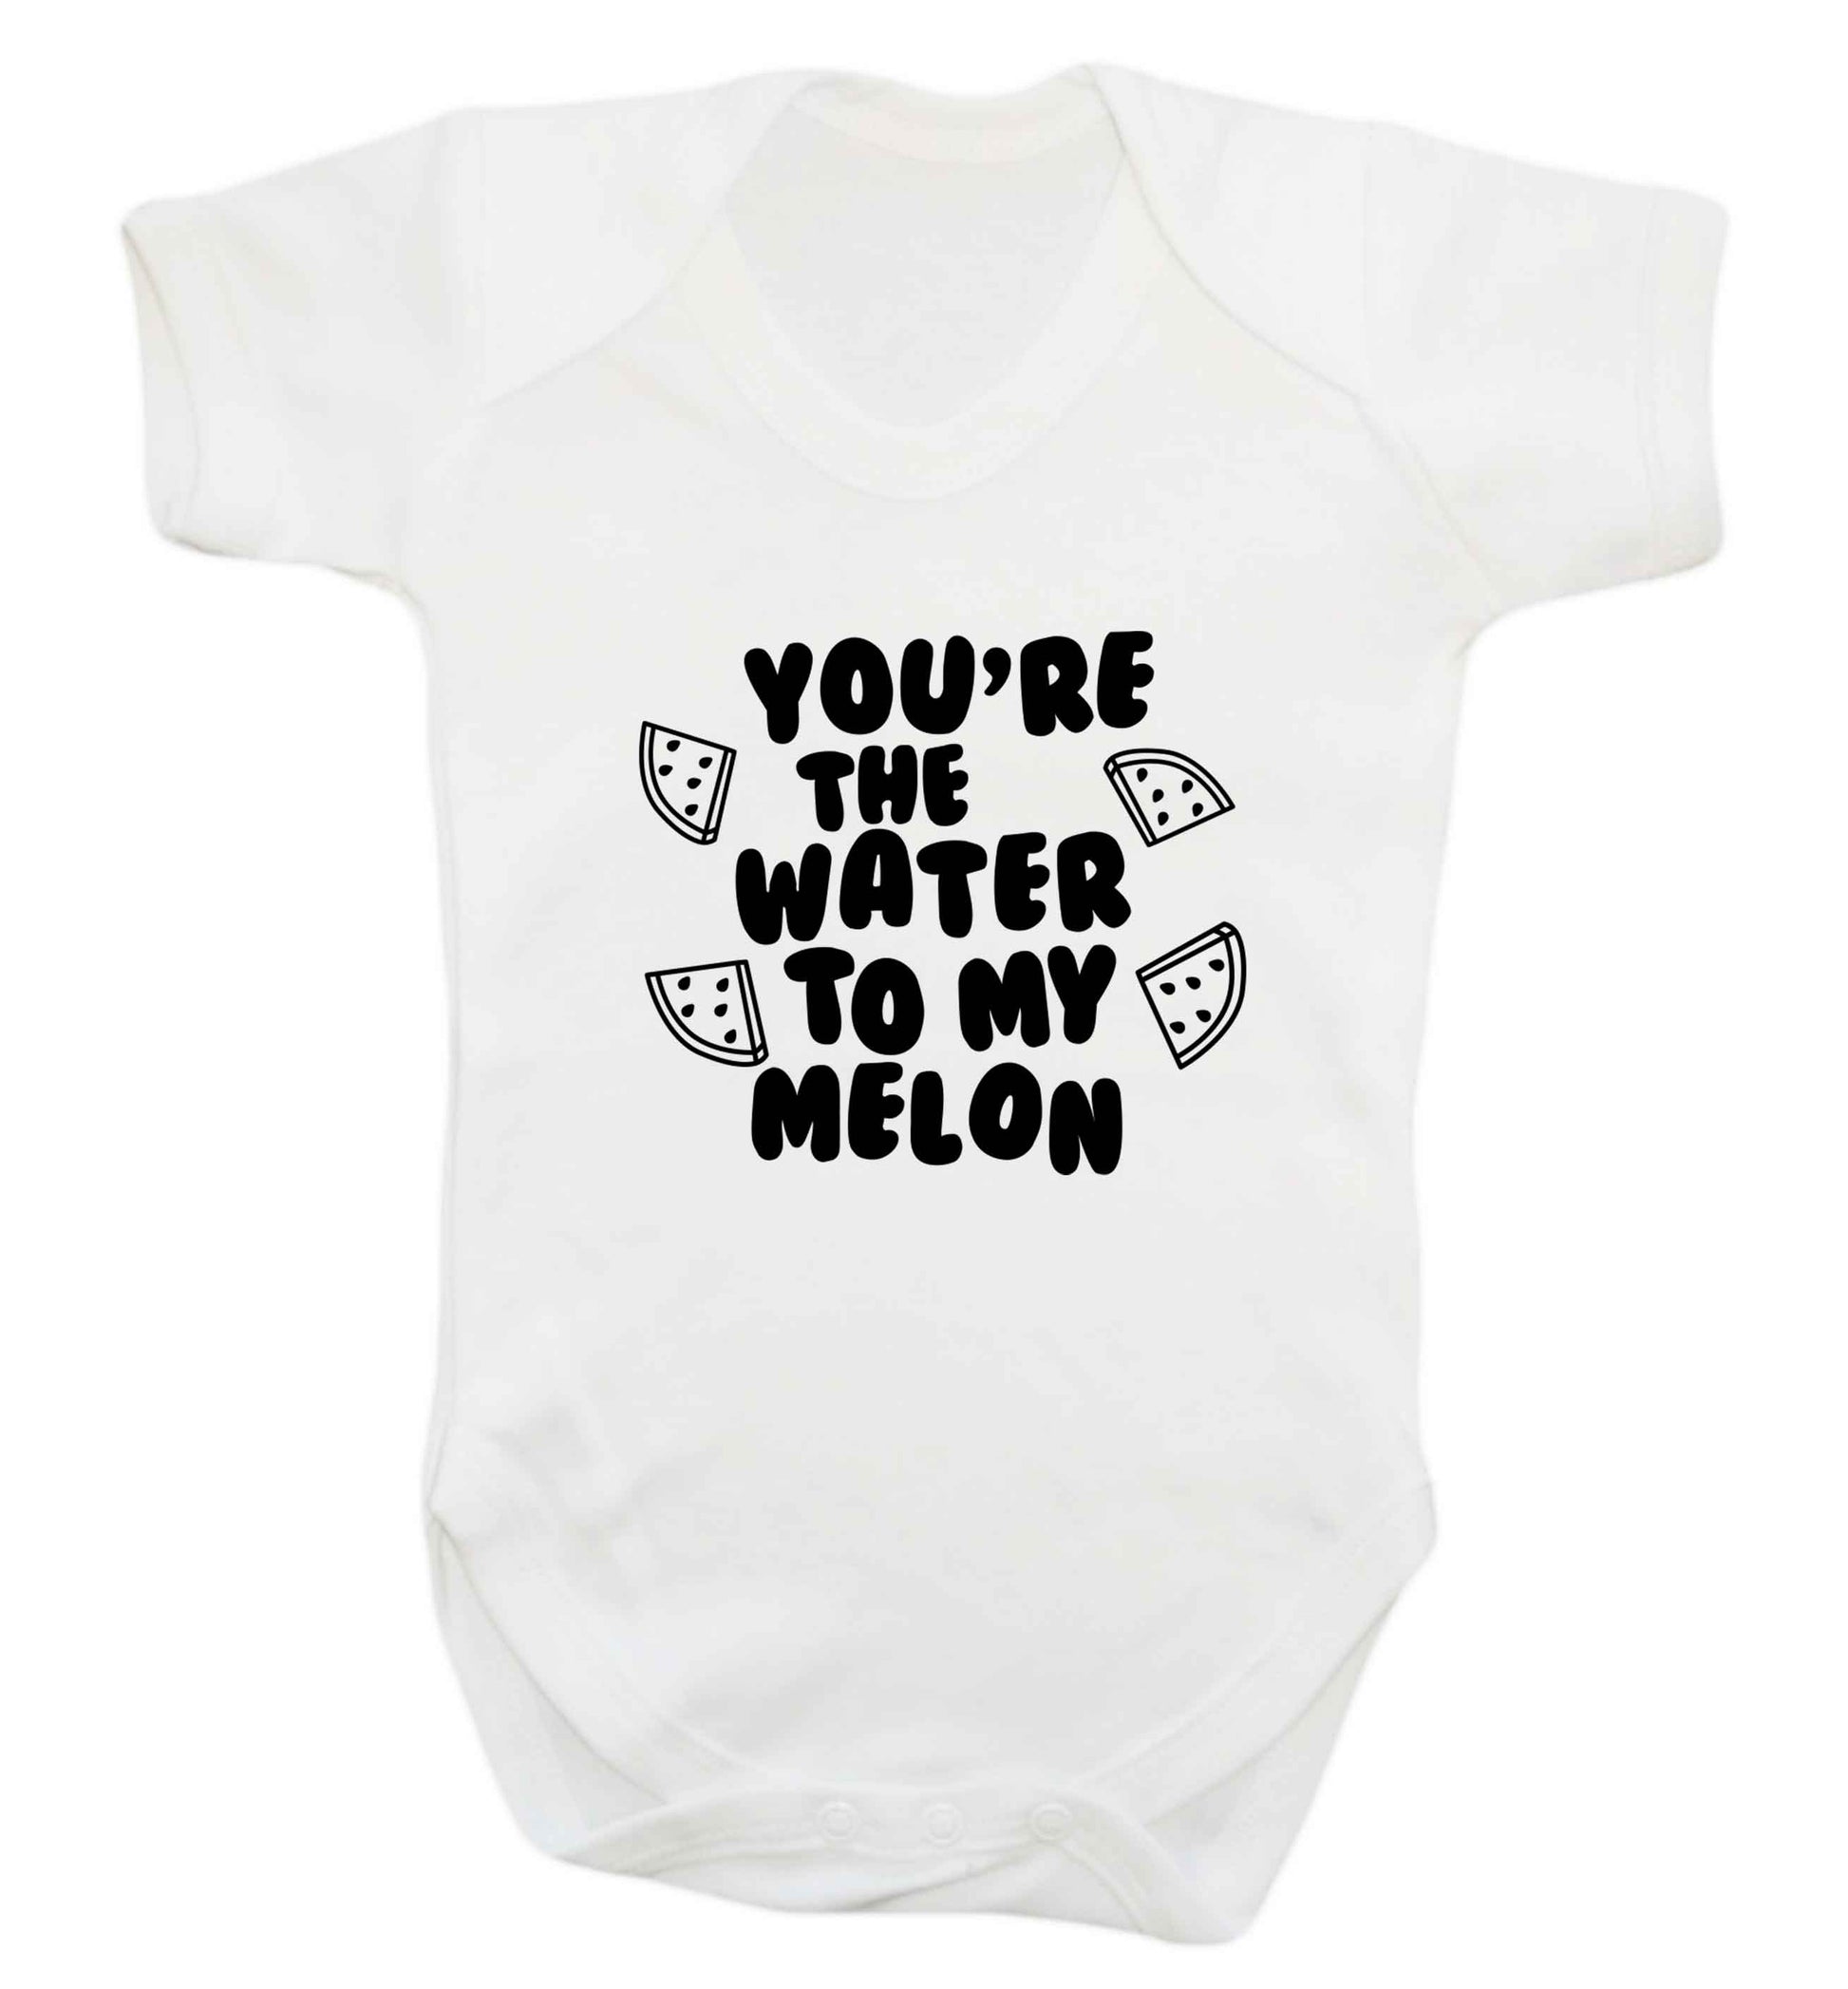 You're the water to my melon baby vest white 18-24 months